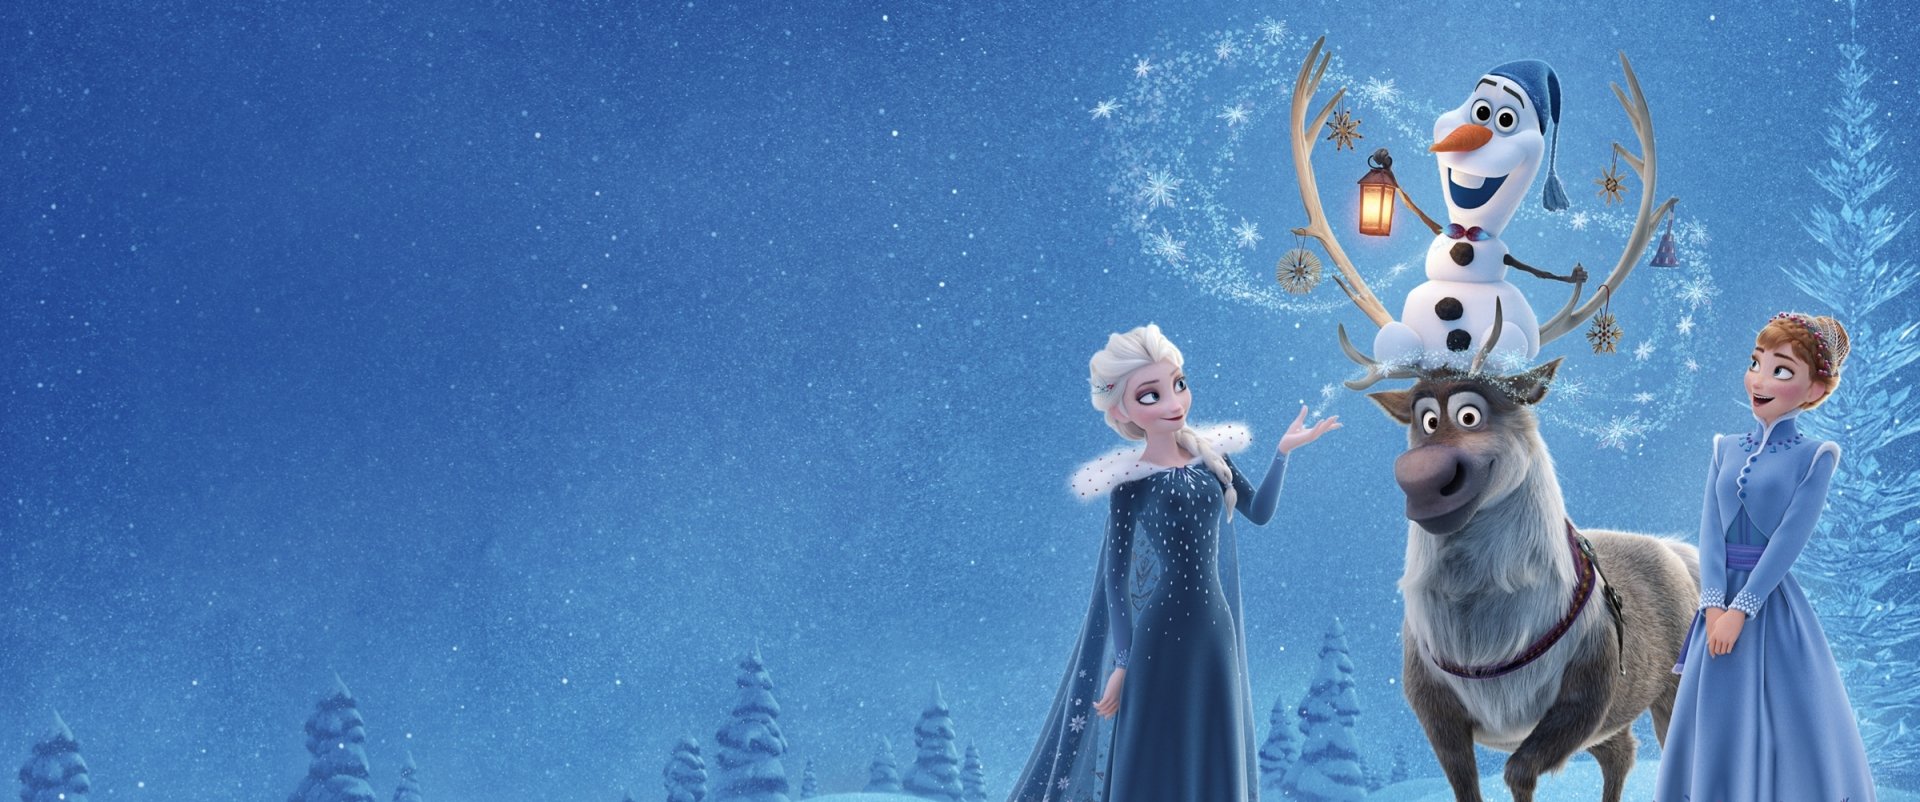 Frozen Adventure with Elsa, Anna, Olaf, and Sven HD Wallpaper